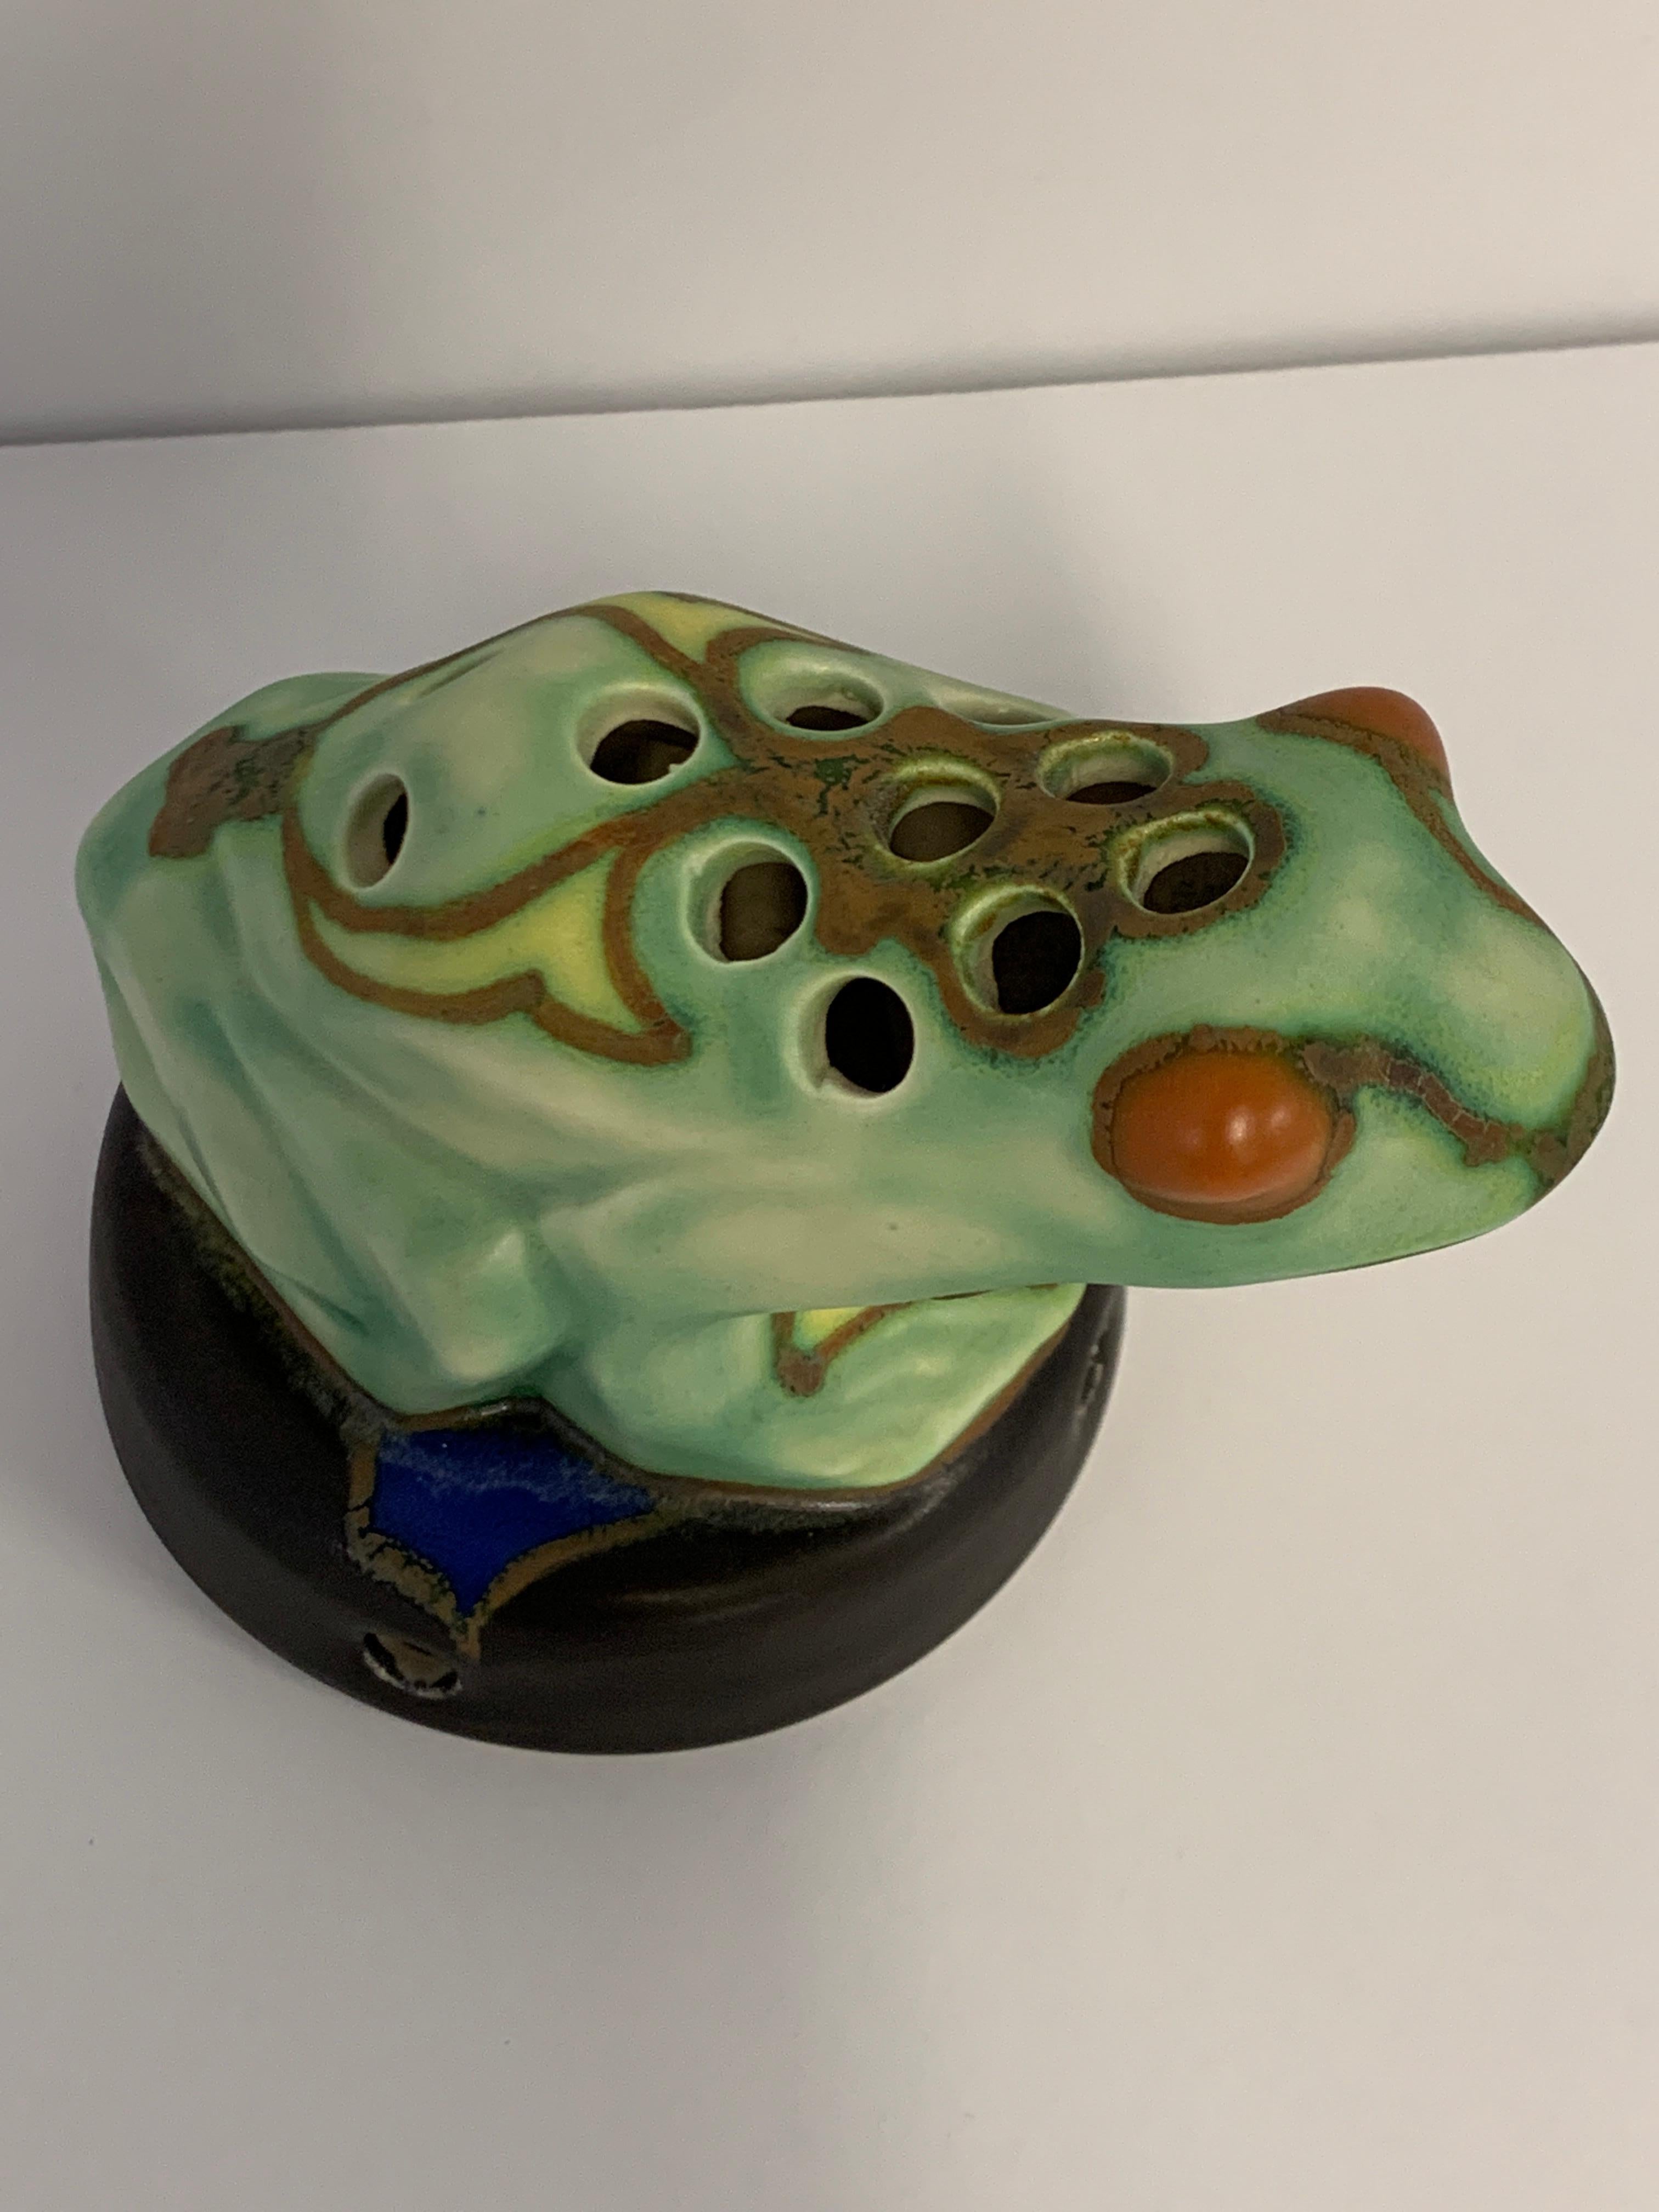 A nice vibrant pottery frog by Gouda of Holland. It is marked on the base Ravorige Koniklijk Goedewaagen Gouda Holland 670. In Good condition with age appropriate wear and minor imperfections.